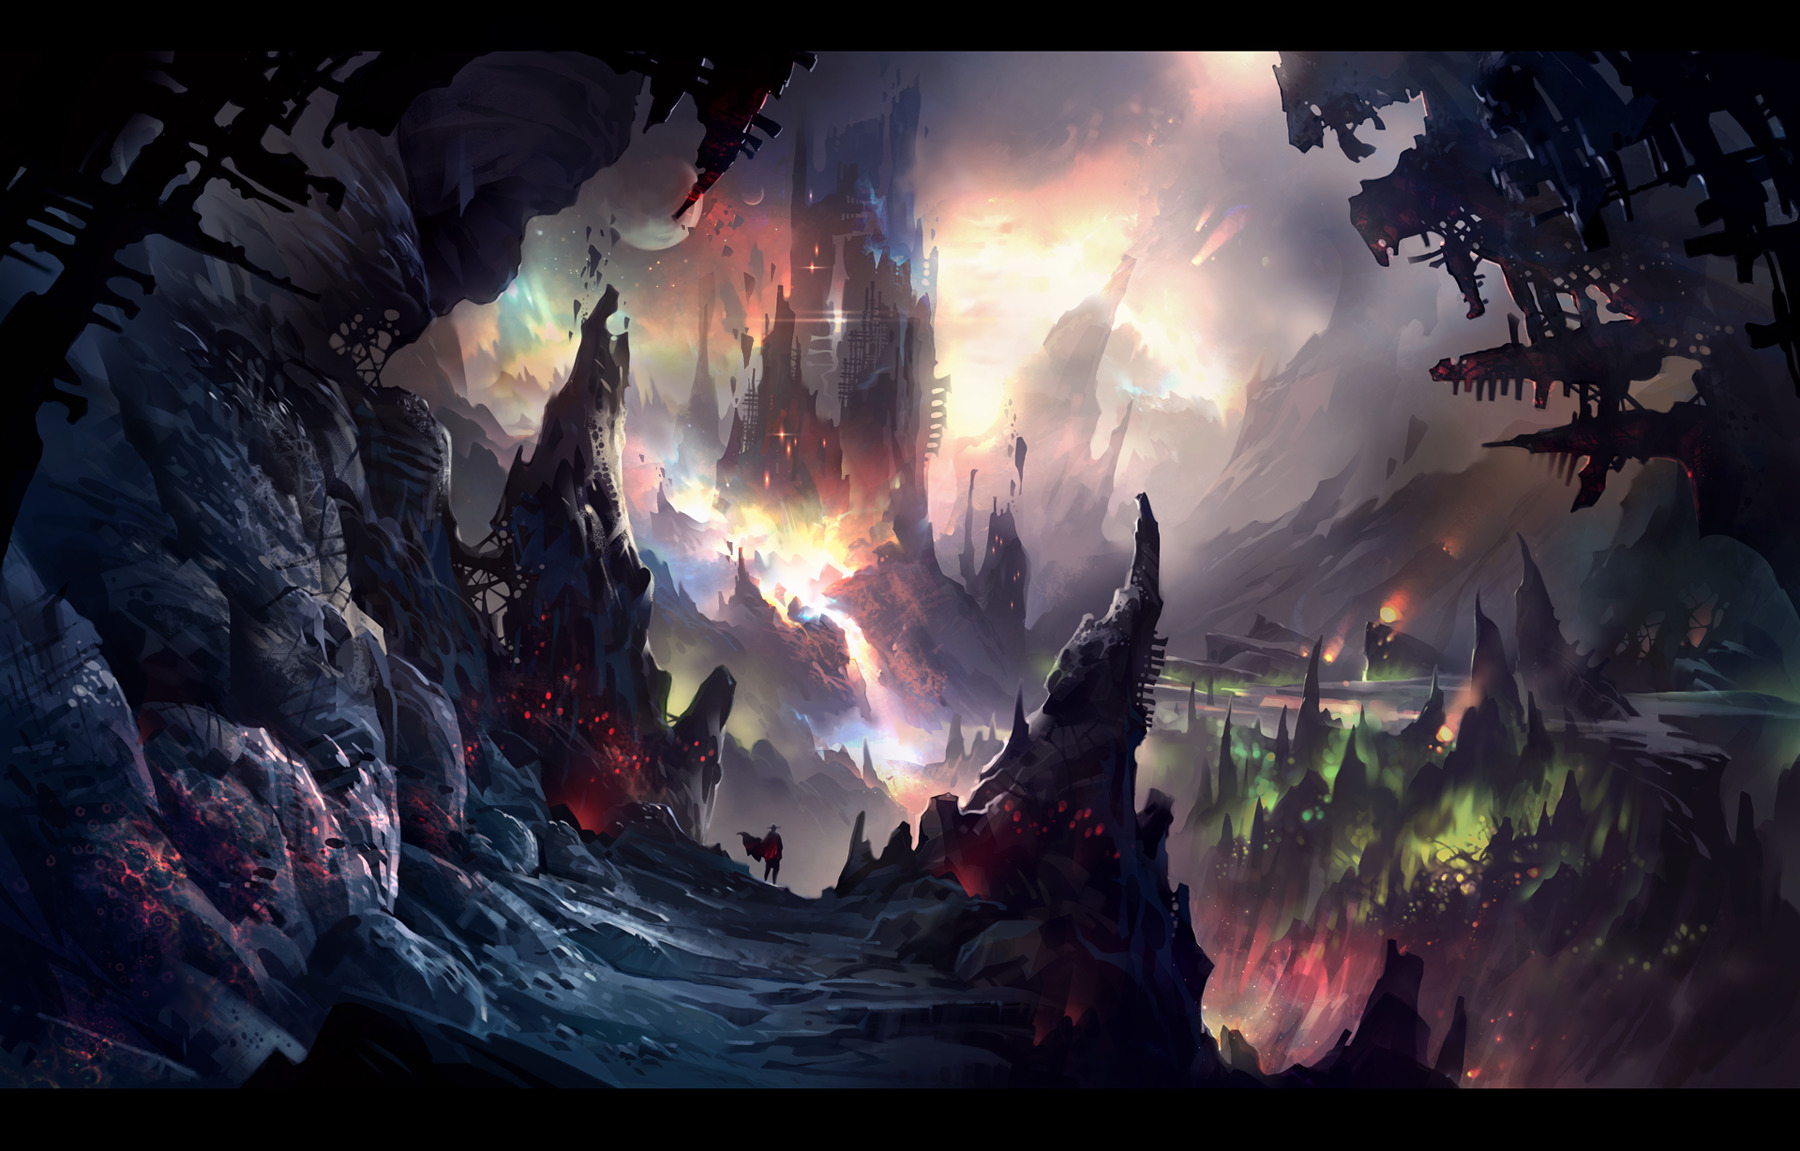 drawing wallpaper hd,action adventure game,geological phenomenon,darkness,cg artwork,sky